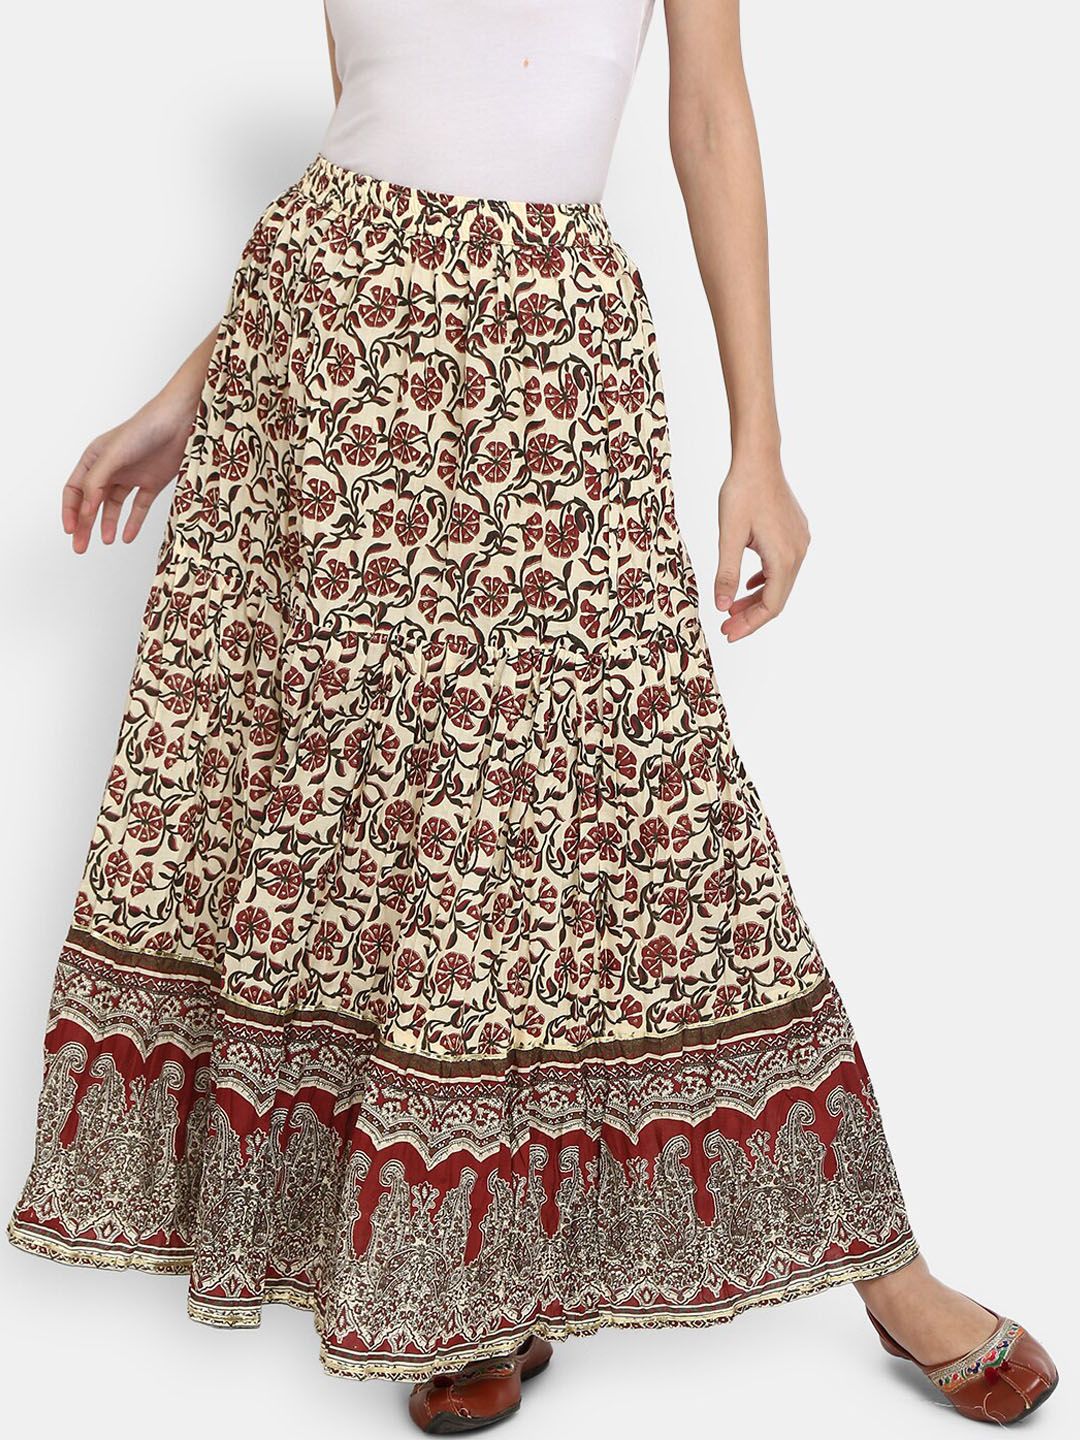 V-Mart Women Beige & Maroon Ethnic Floral Printed Pure Cotton Flared Skirt Price in India